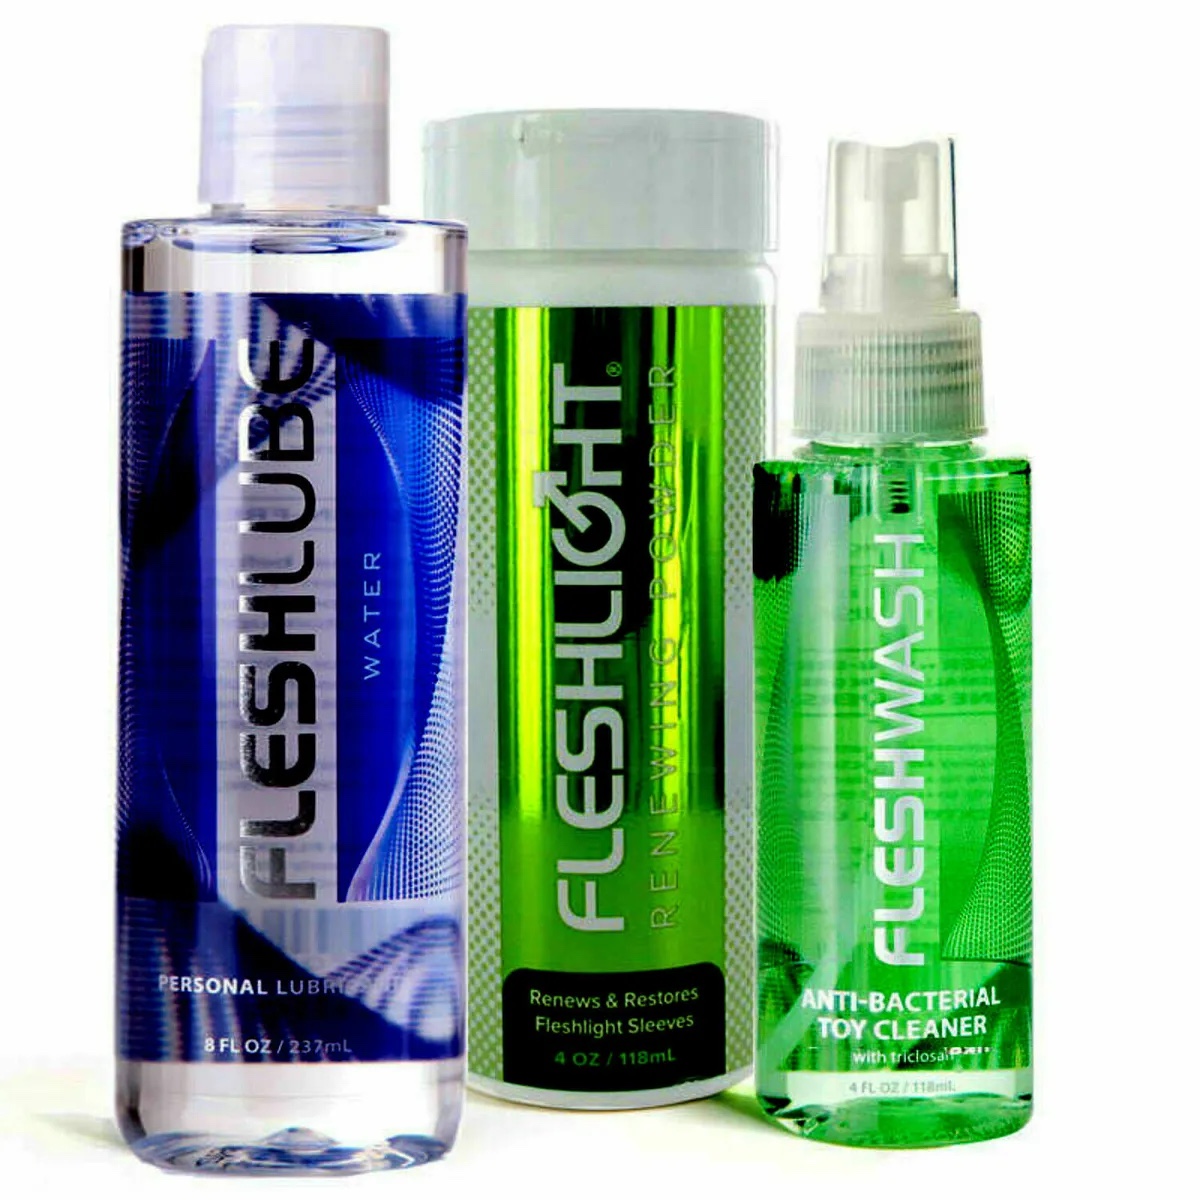 Best Lubes for Fleshlight: What to Use and What to Avoid